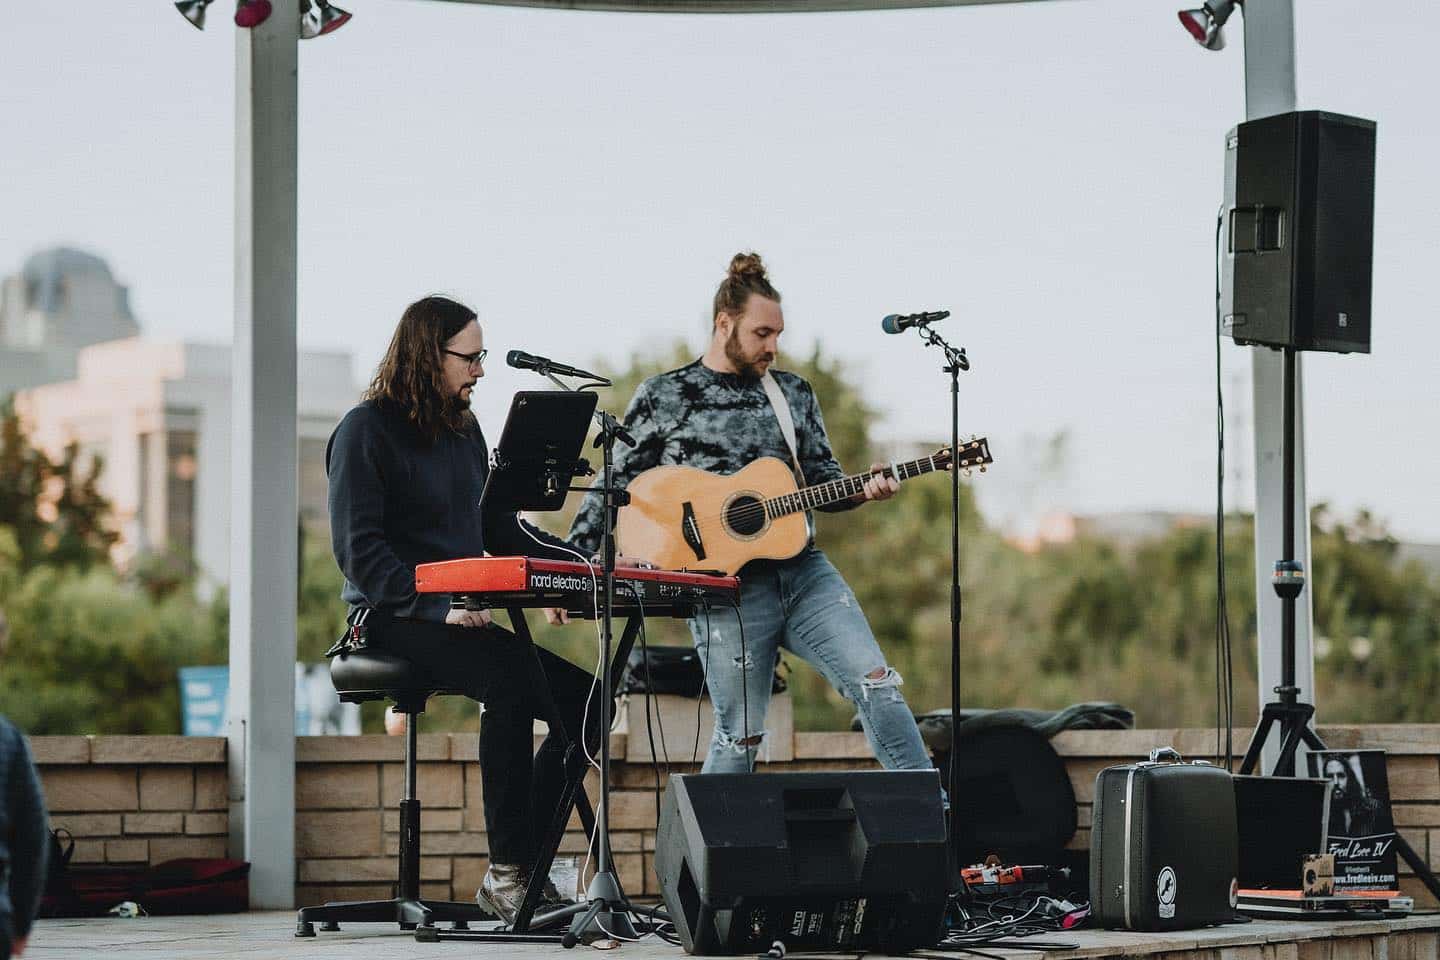 Music at the Met is back! Join us every Thursday evening from April 20th to October 5th for live music featuring local artists 

Visit the link in our bio for more information!